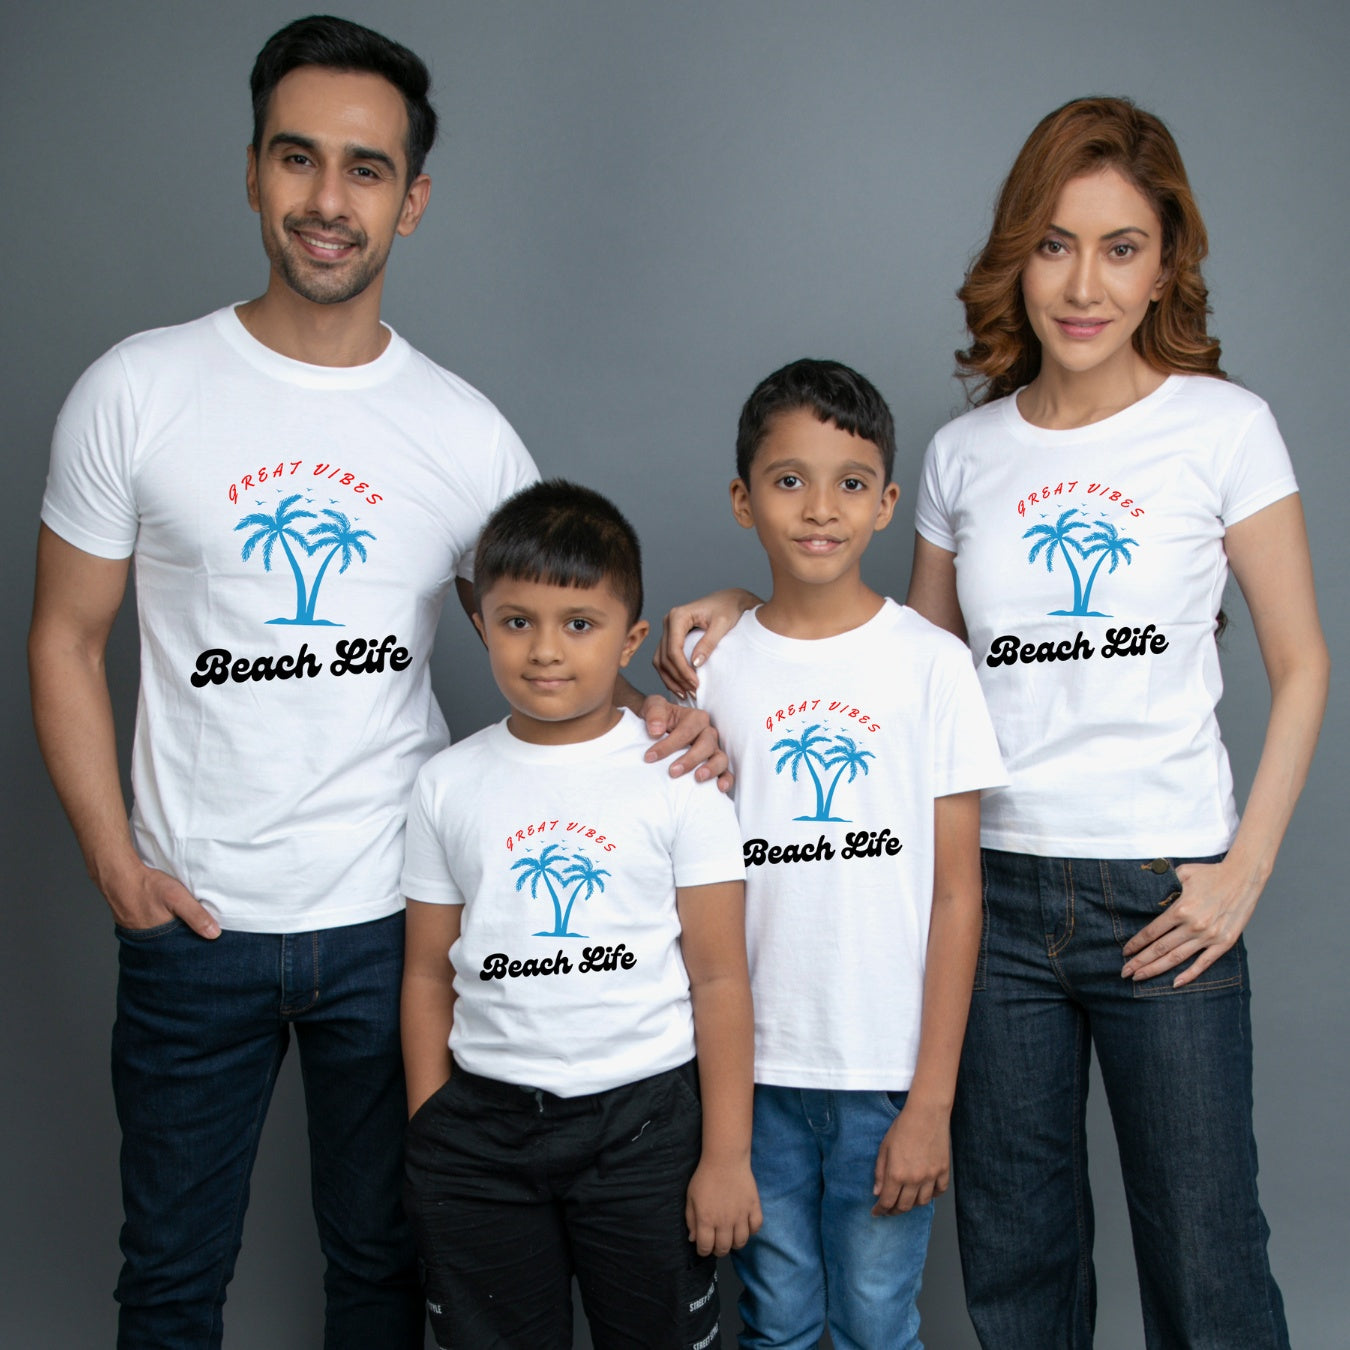 Family t shirts set of 4 Mom Dad Two Sons in White Colour - Beach Life Variant